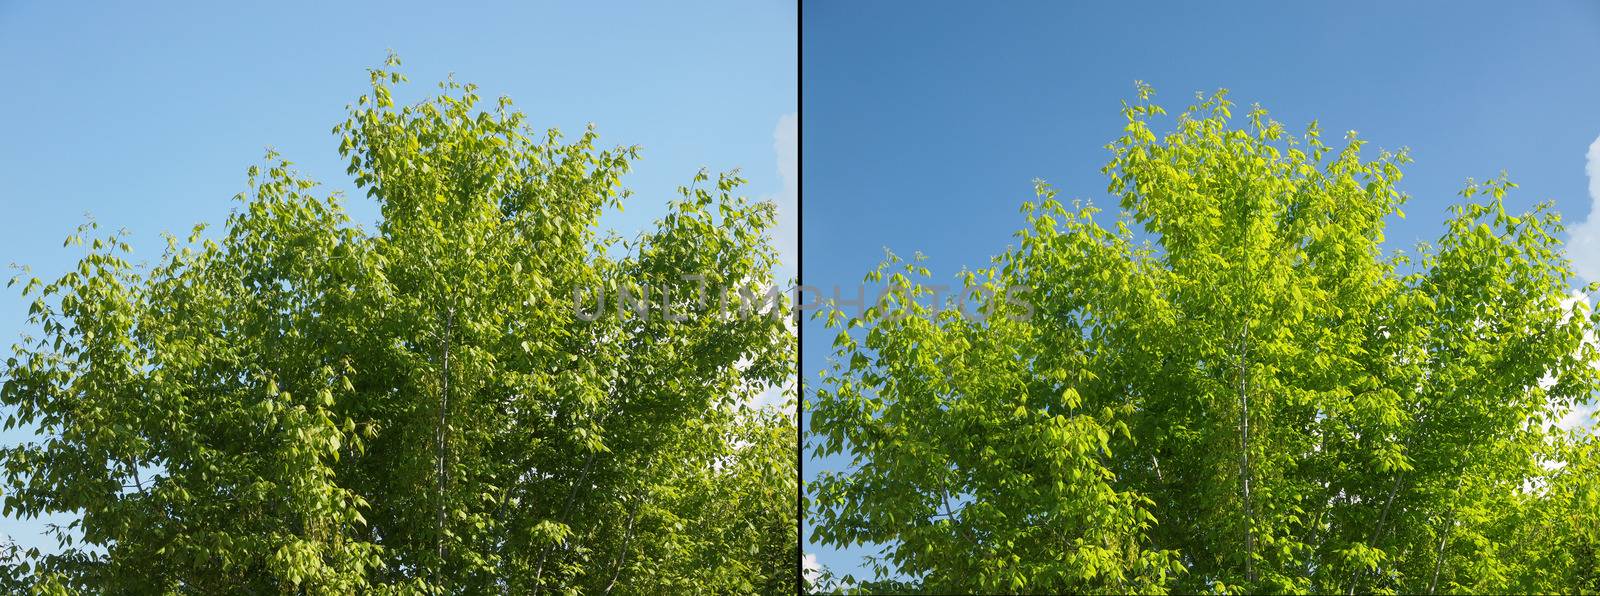 Effect of polarising filter on trees and sky to improve the appearance of landscapes - Sky is bluer and leaves are greener - Without filter on the left - With filter on the right